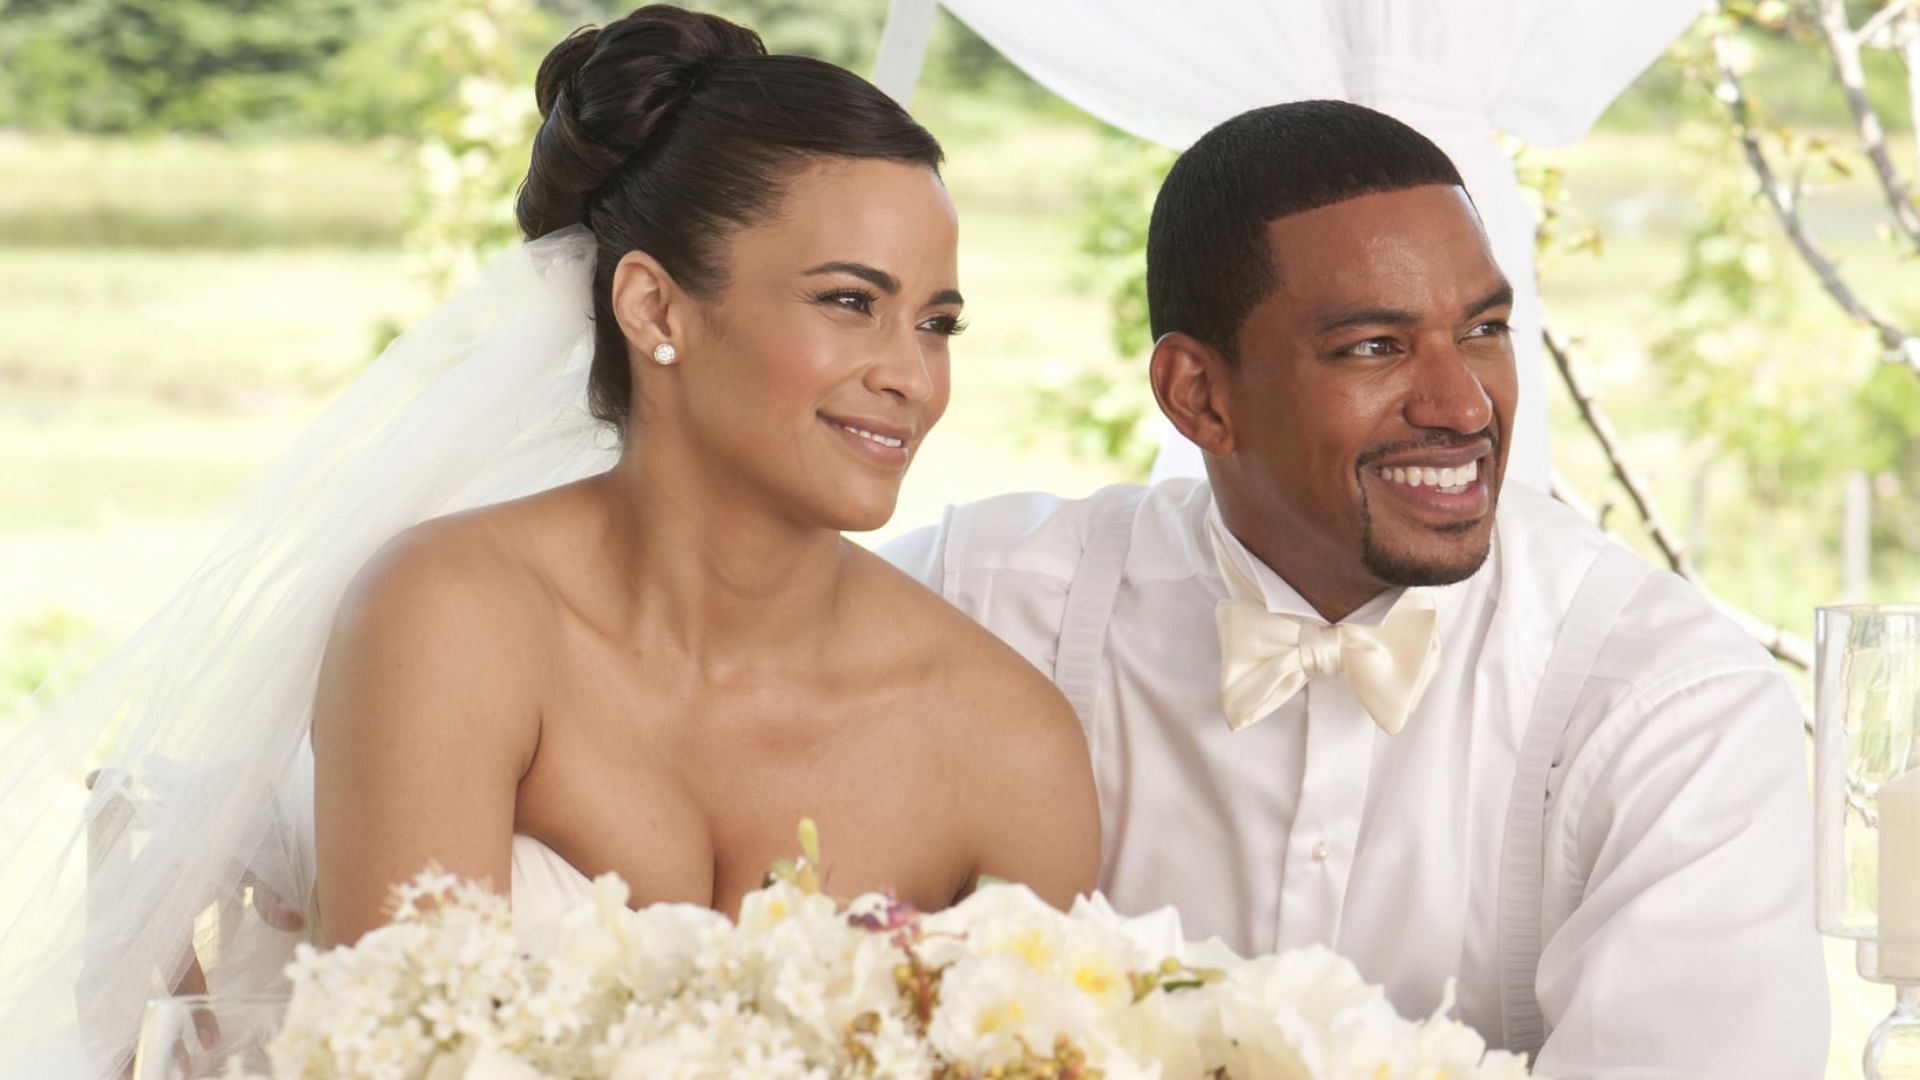 The movie derives its title from the Black American tradition wherein the bride and groom jump over a ceremonial broom (Image via Sony Pictures)